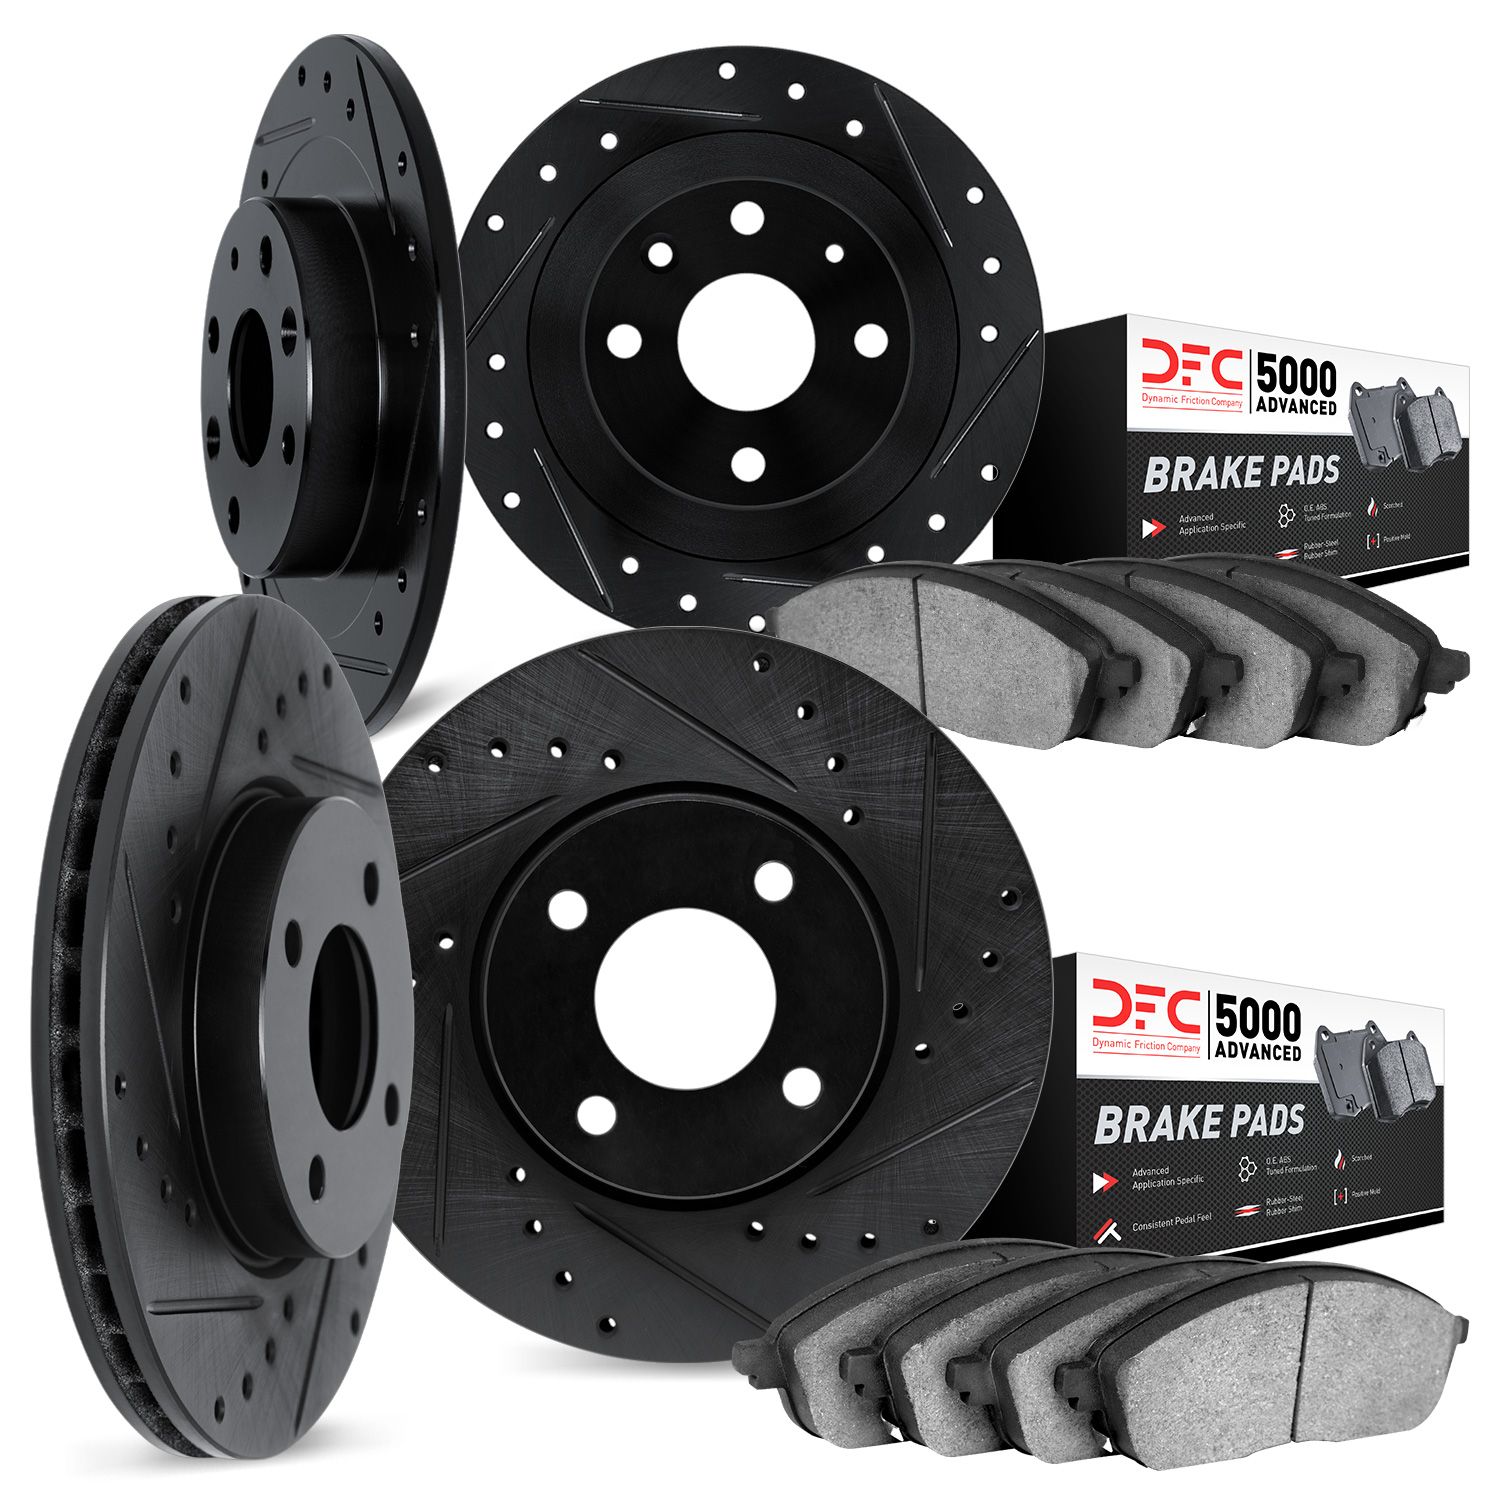 8504-54401 Drilled/Slotted Brake Rotors w/5000 Advanced Brake Pads Kit [Black], Fits Select Ford/Lincoln/Mercury/Mazda, Position